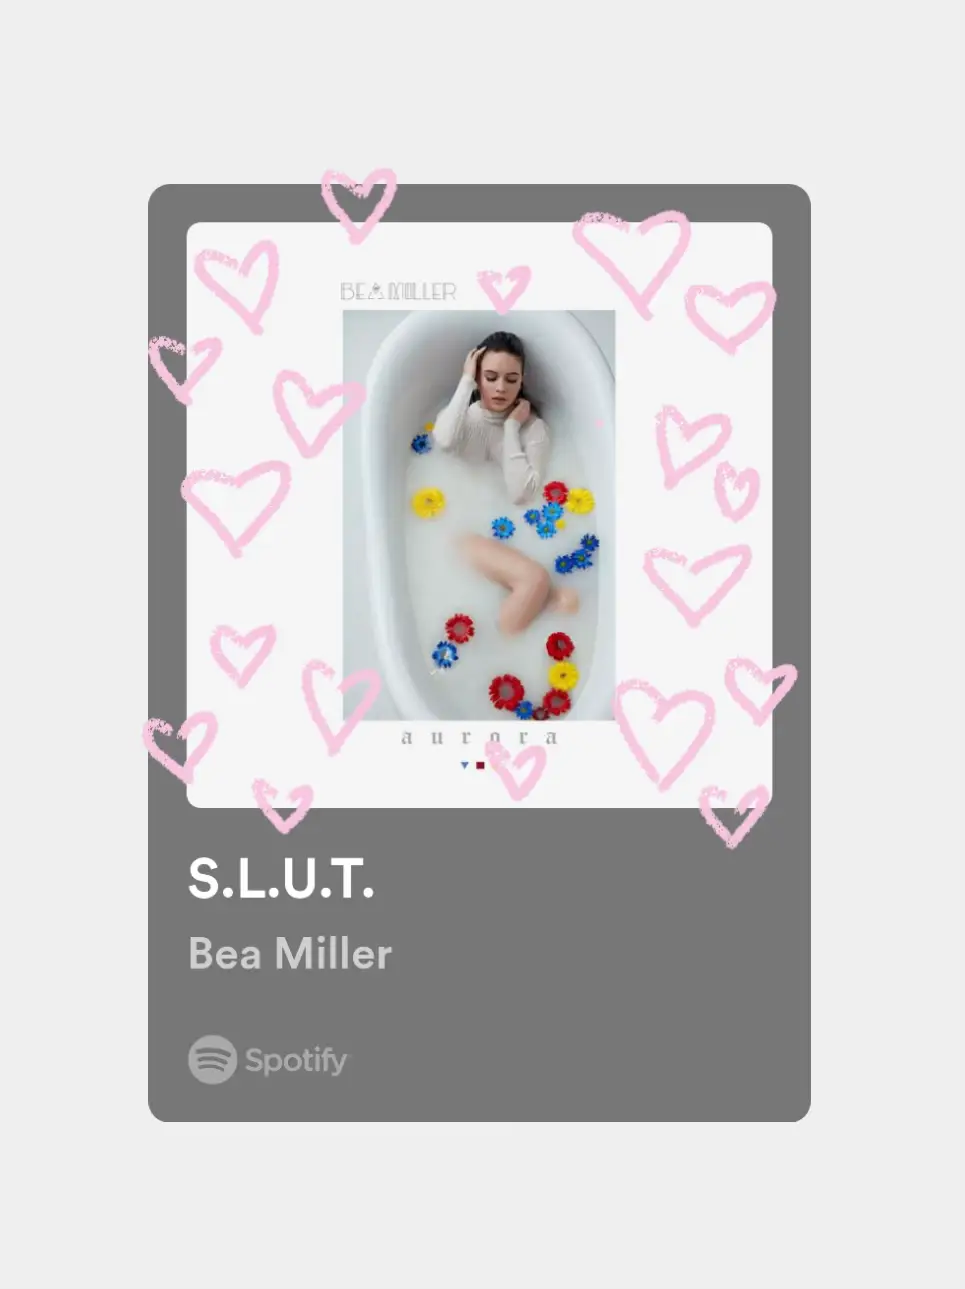  A Spotify ad with a woman in a white shirt.